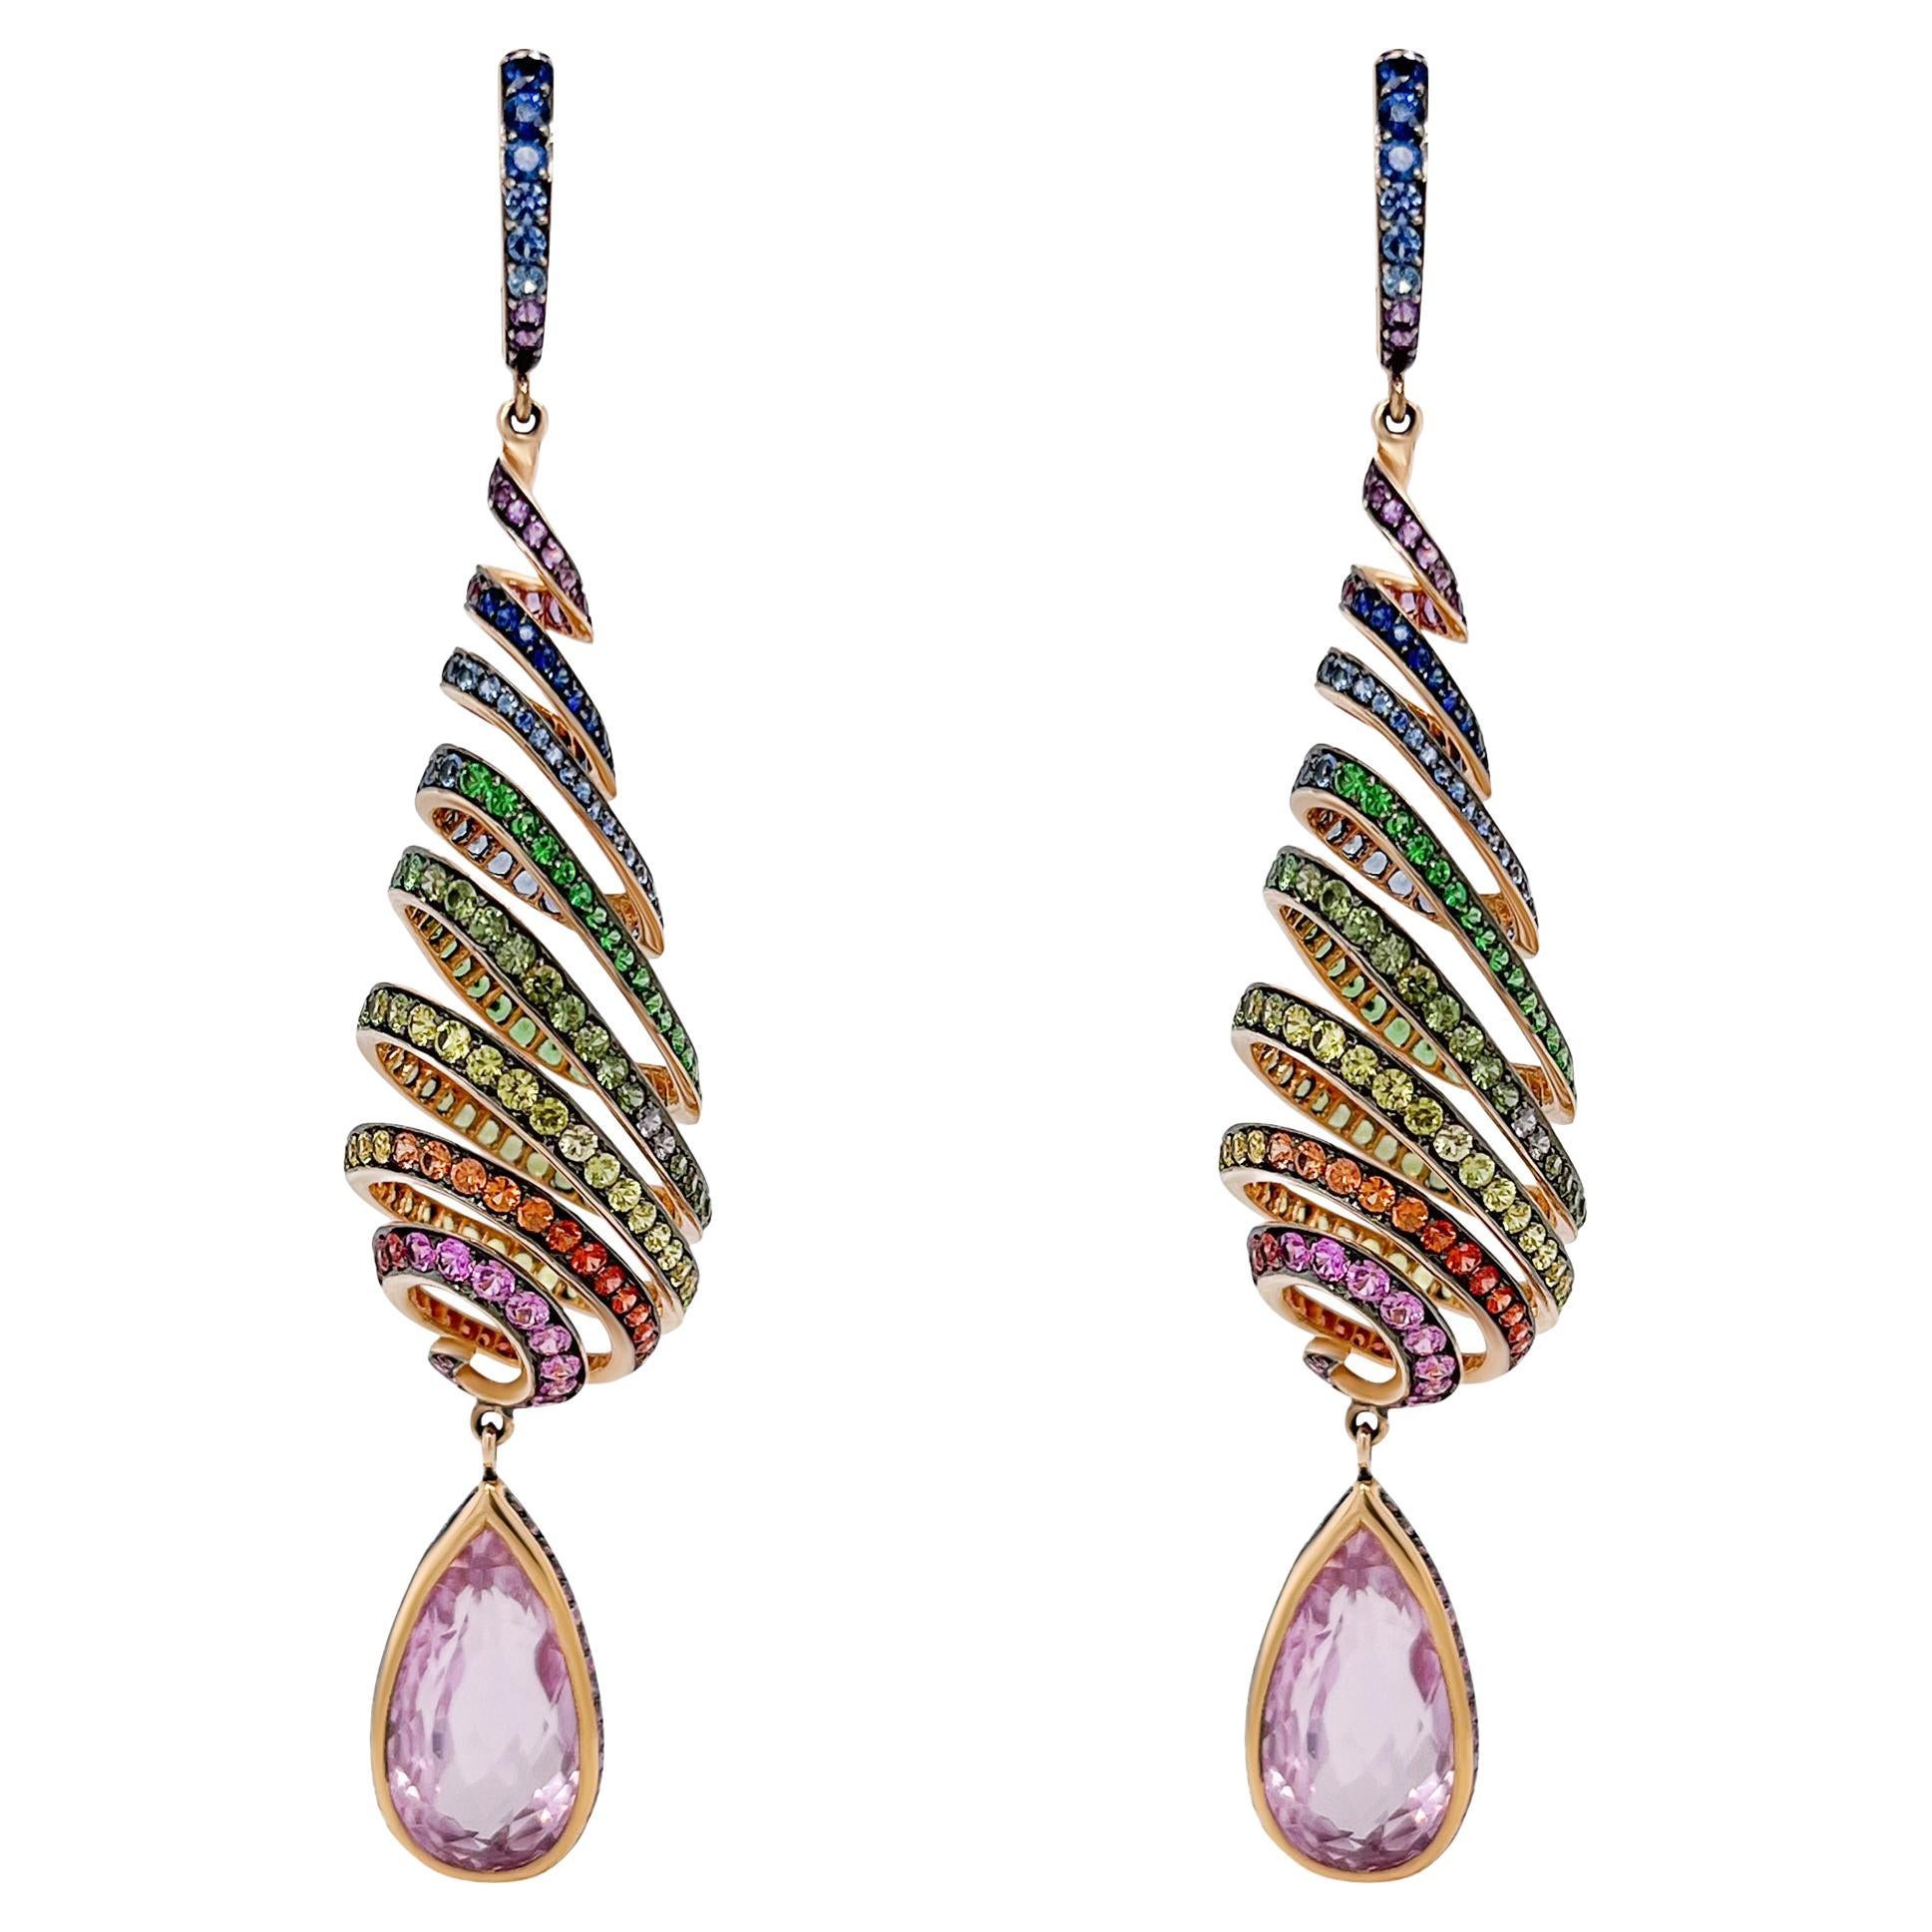 29.46 Carat Kunzite Spiral Earrings with Rainbow Natural Sapphires in Pink Gold